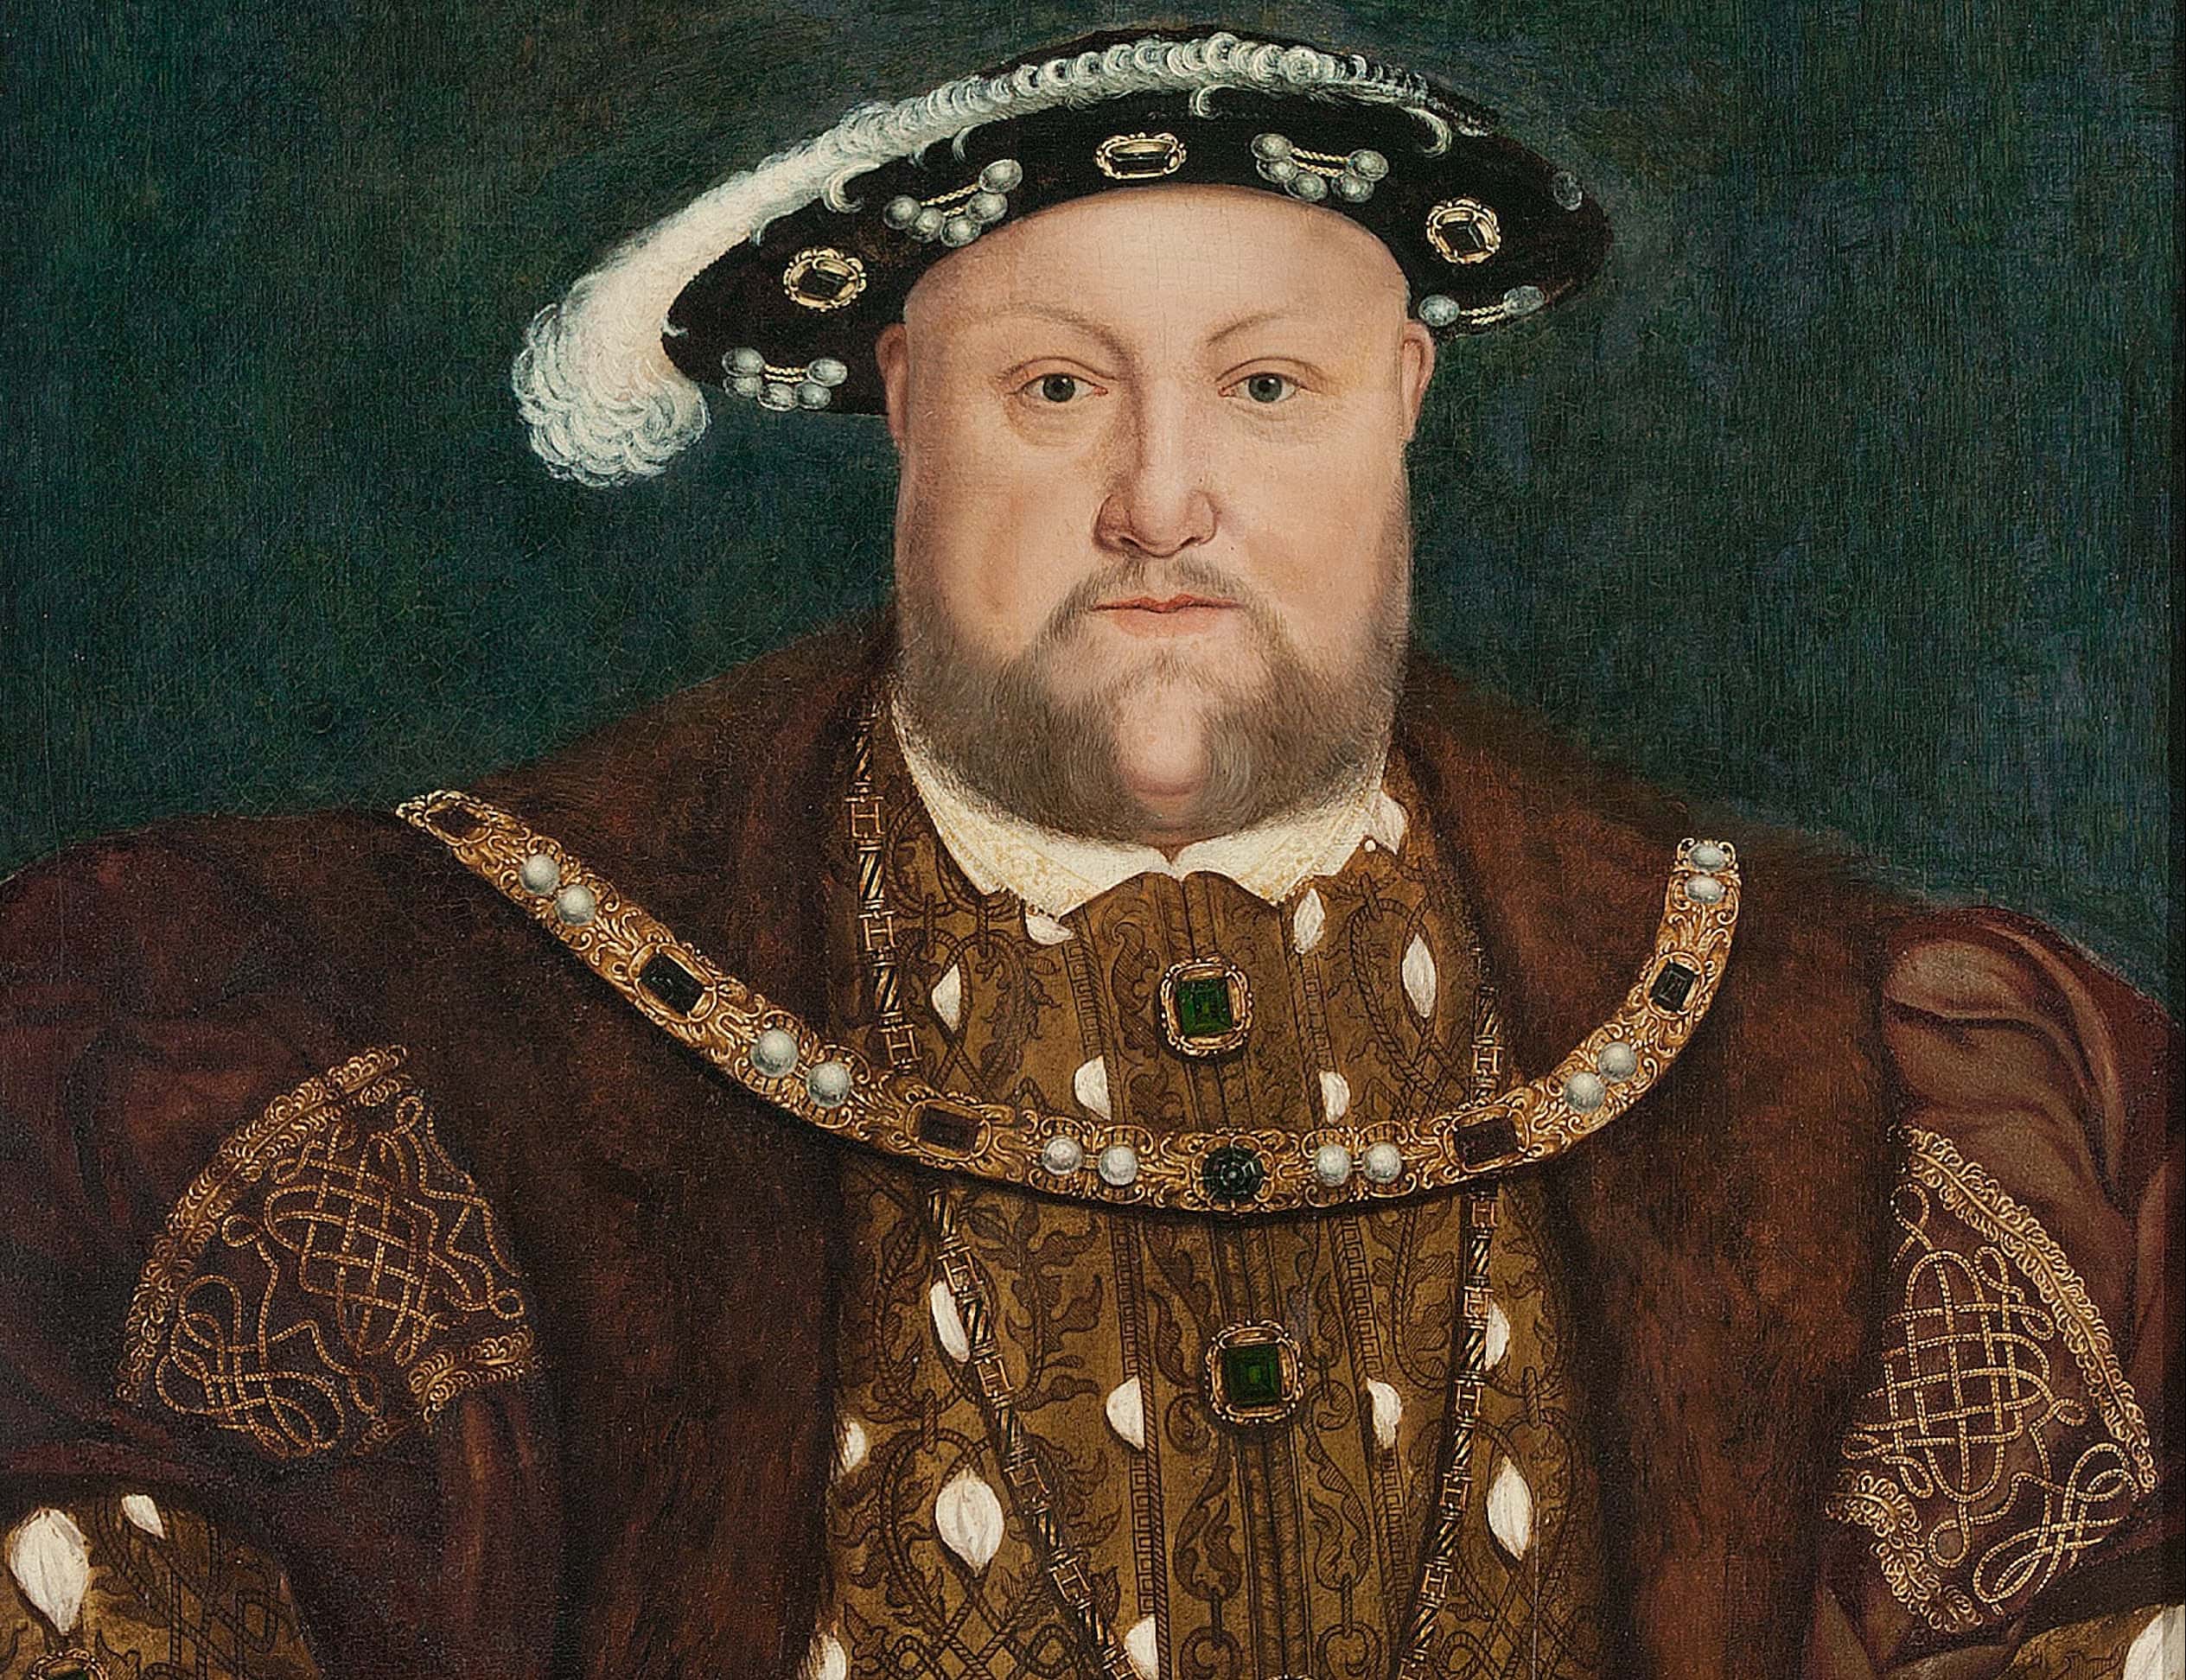 <p class="p2"><span><a href="https://www.factinate.com/instant/53-head-rolling-facts-about-henry-viii-the-worst-king-in-english-history/" rel="noopener">Henry VIII</a> loved collecting things, whether it was tapestries or meals during the day. But one thing he loved especially was weaponry. His collection included a total of 6,500 handguns, and a huge battle-axe which lay next to his bed while he slept. We can only imagine what a sight that must have been for his wives.</span></p>